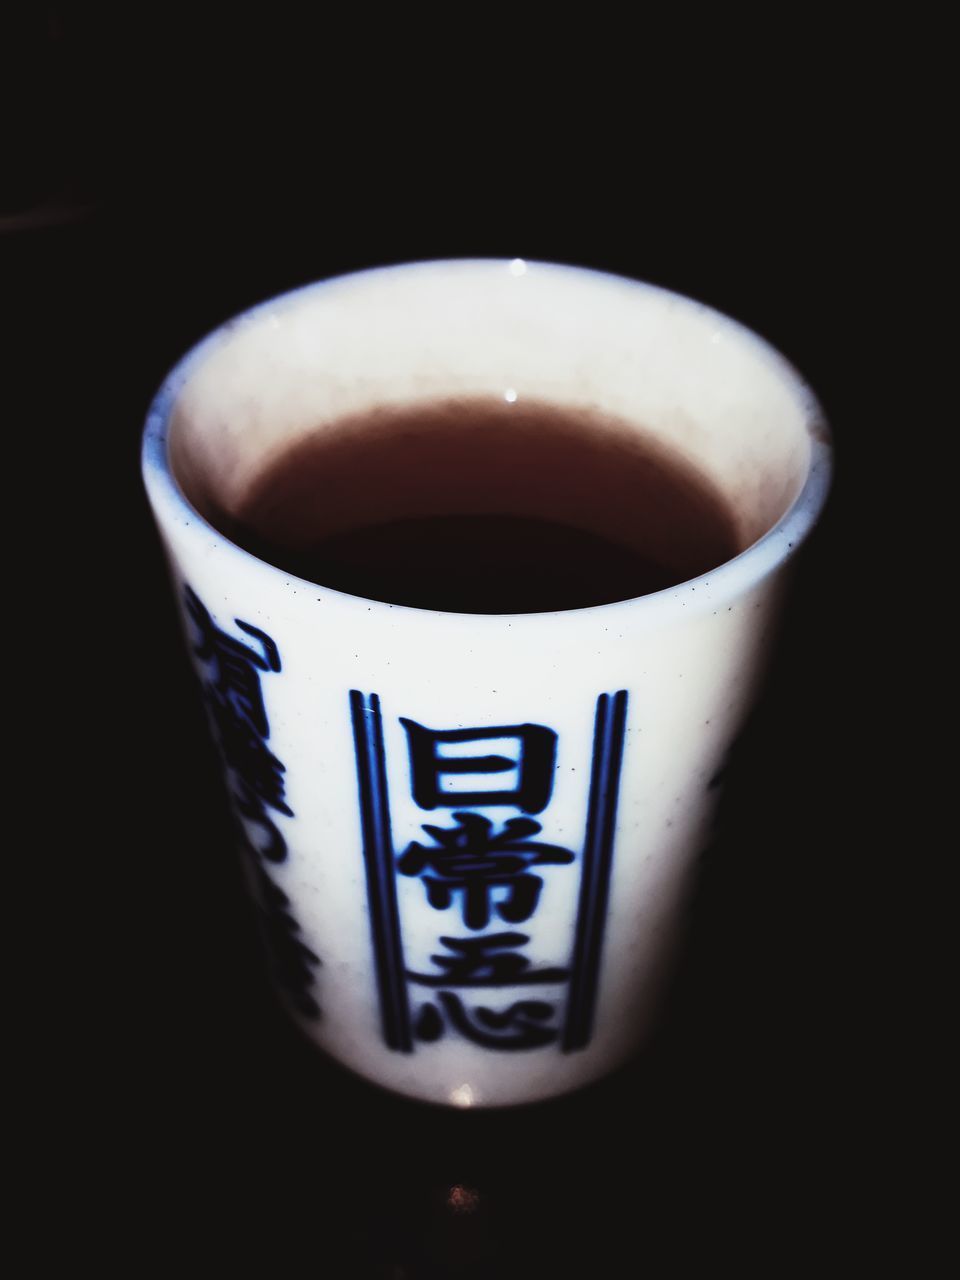 CLOSE-UP OF COFFEE CUP WITH BLACK BACKGROUND